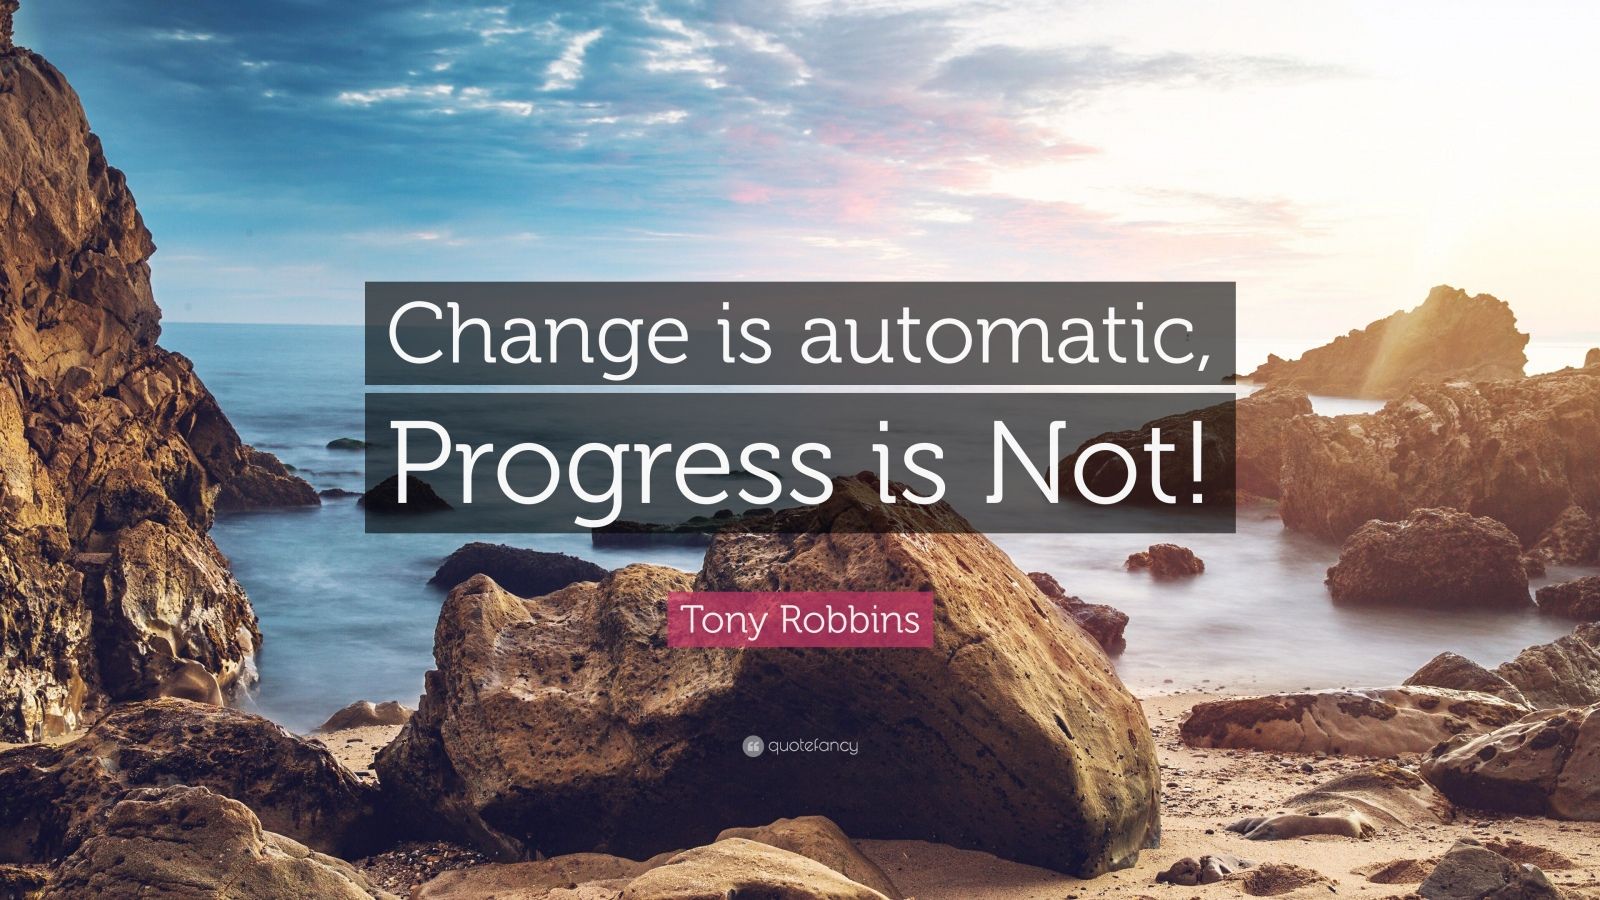 Tony Robbins Quote “Change is automatic, Progress is Not